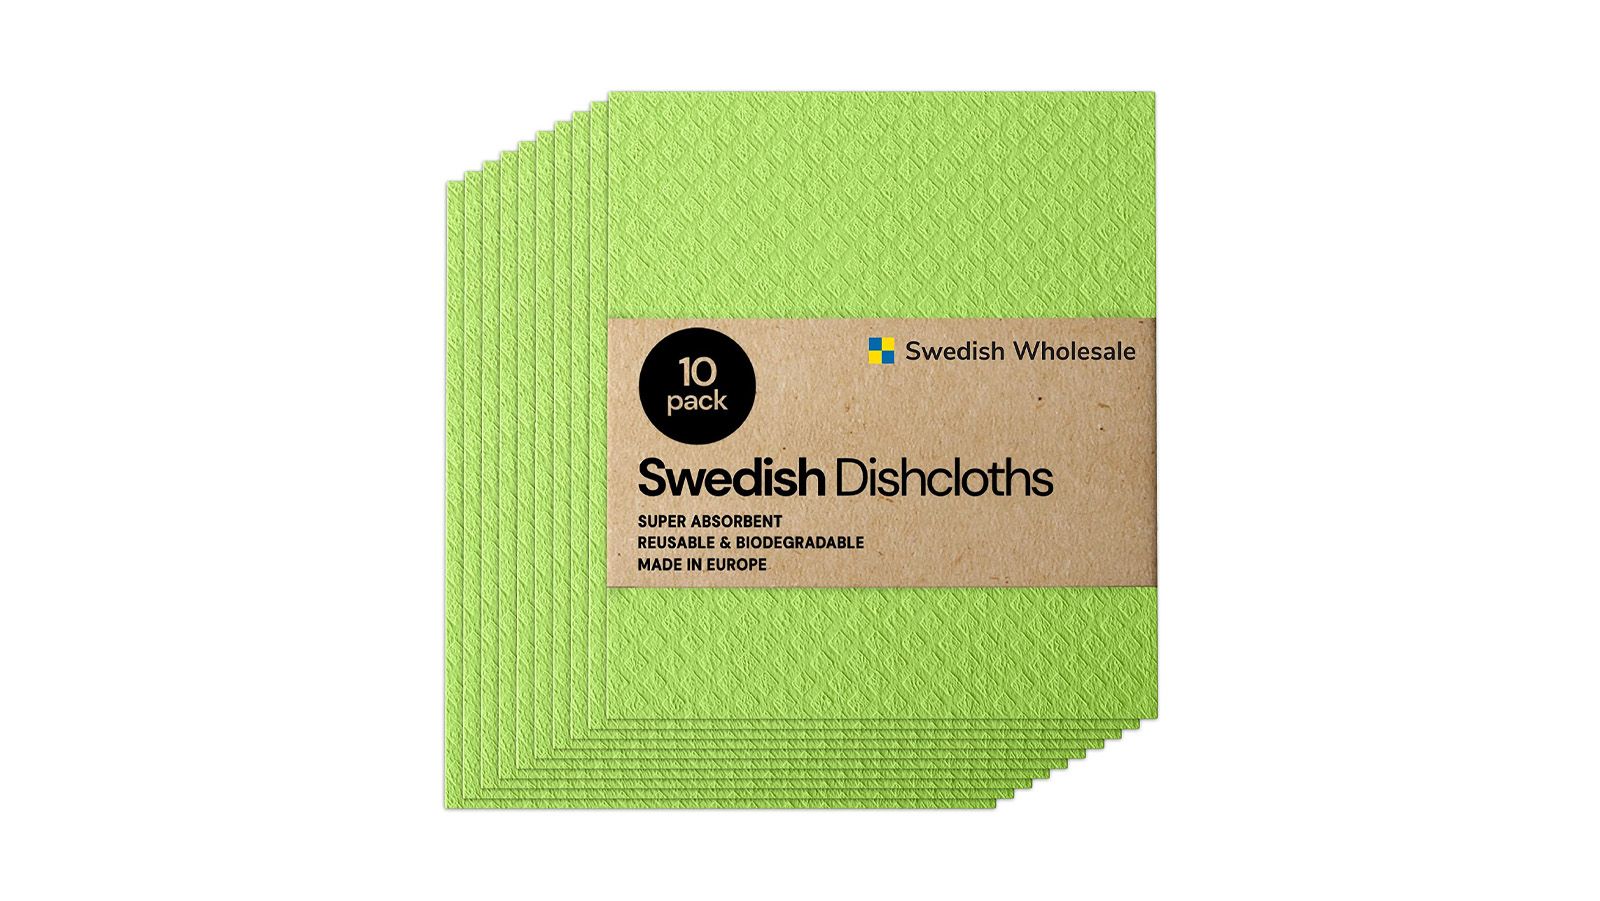 Swedish Dishcloths are on sale for $14 today